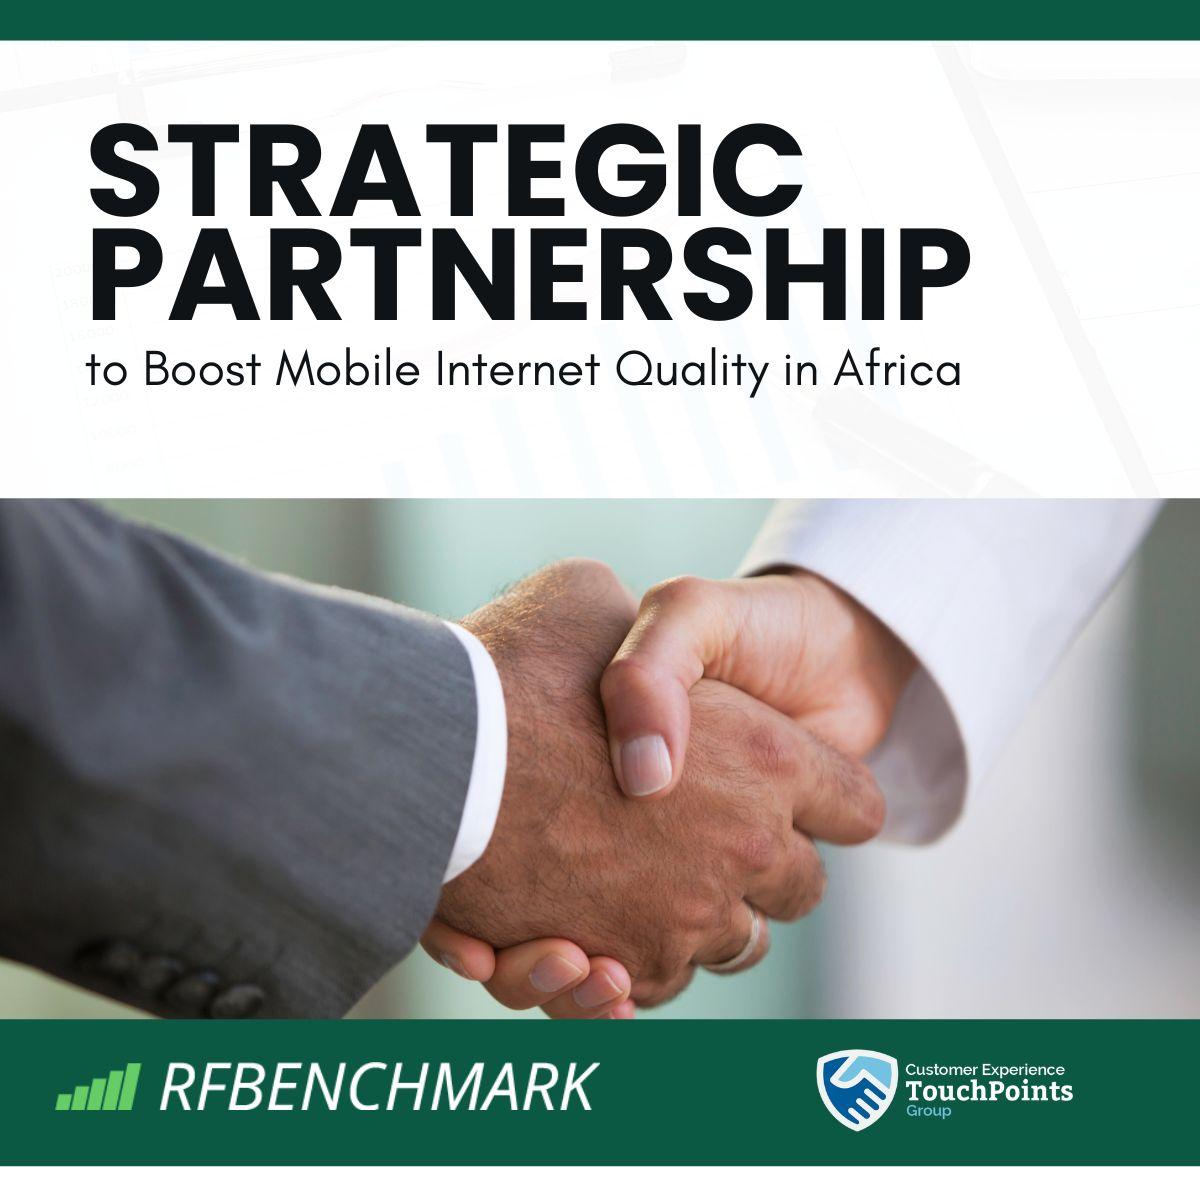 RFBENCHMARK and CX Touchpoints Group Join Forces to Revolutionize Africa’s Mobile Internet